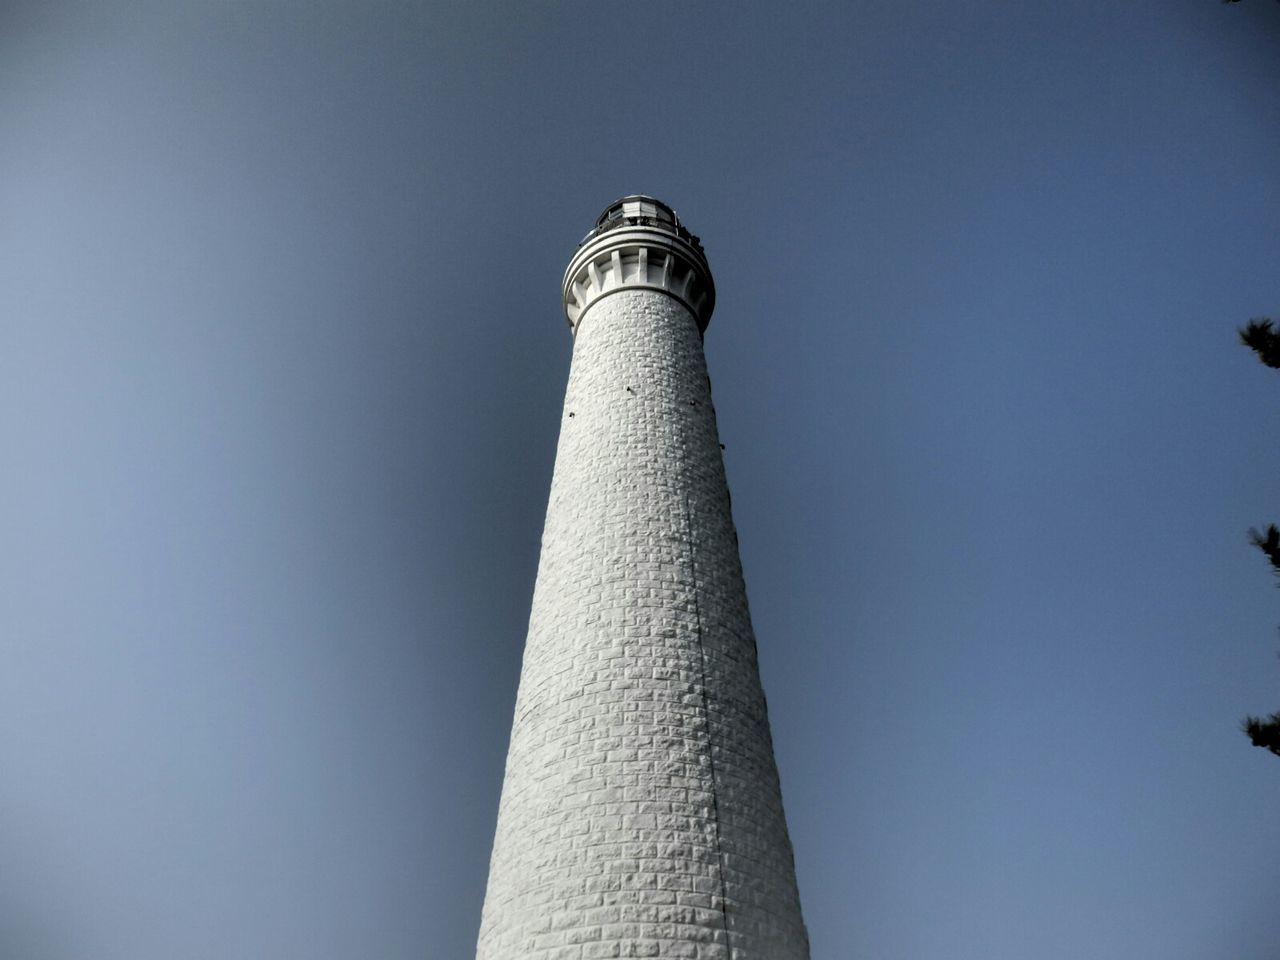 architecture, low angle view, built structure, tower, building exterior, tall - high, clear sky, lighthouse, guidance, blue, copy space, direction, tall, travel destinations, sky, smoke stack, communications tower, famous place, travel, no people